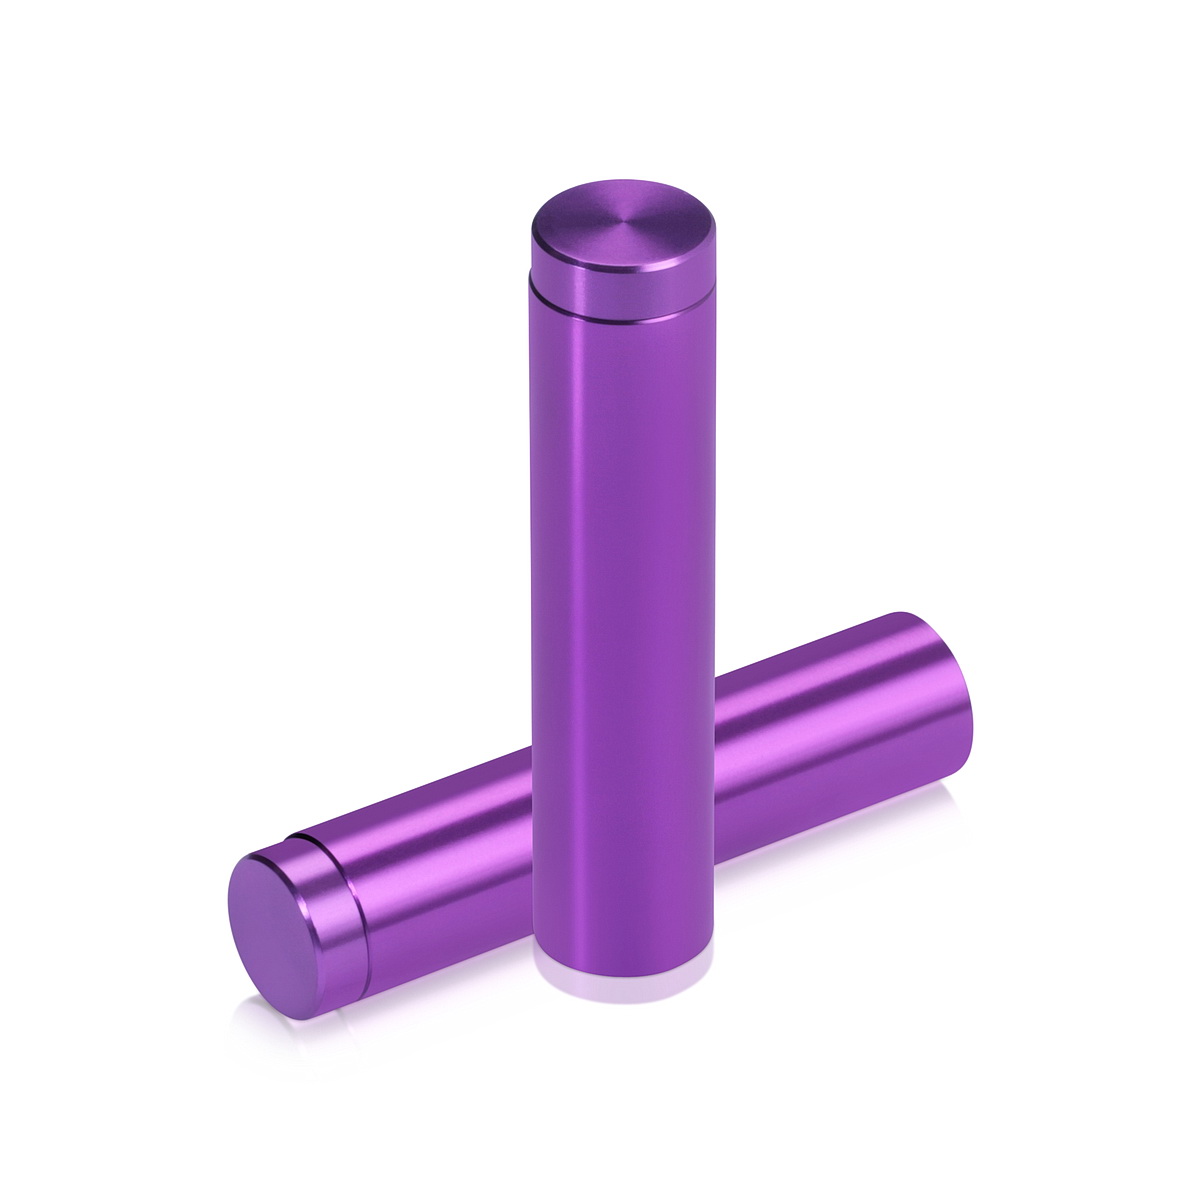 1/2'' Diameter X 2'' Barrel Length, Affordable Aluminum Standoffs, Purple Anodized Finish Easy Fasten Standoff (For Inside / Outside use) [Required Material Hole Size: 3/8'']